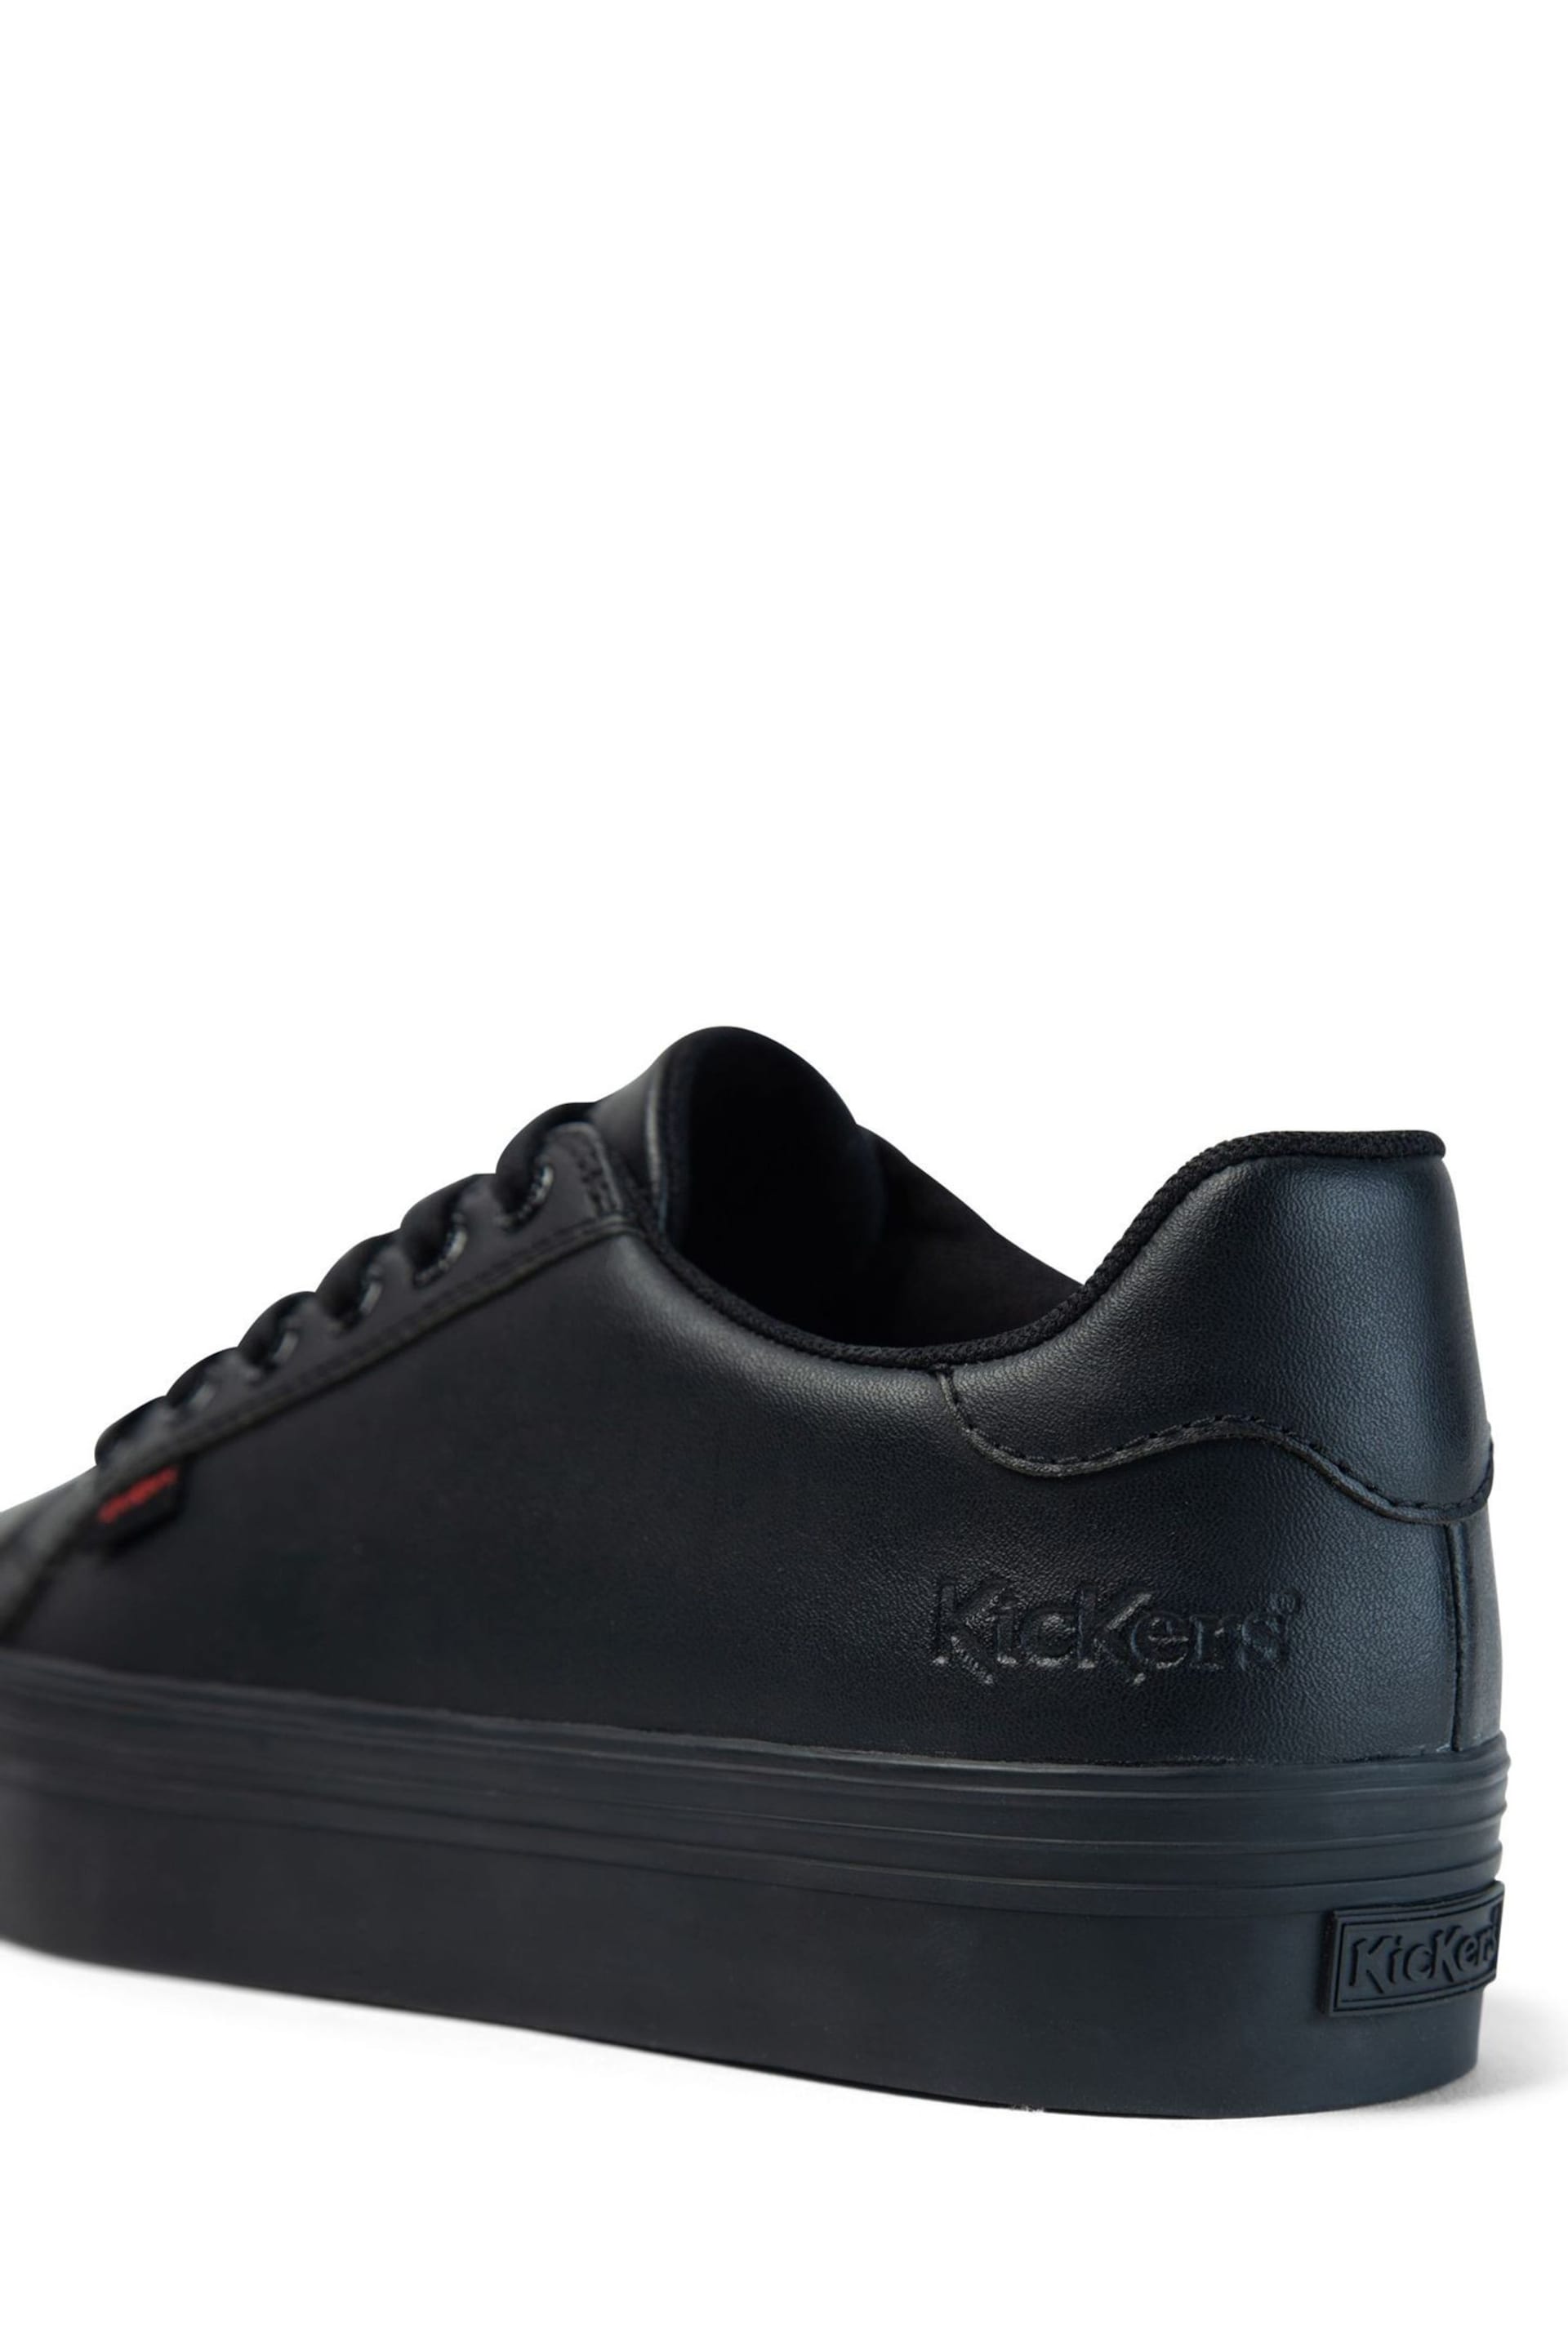 Kickers Womens Black Tovni Stack Leather Shoes - Image 11 of 17